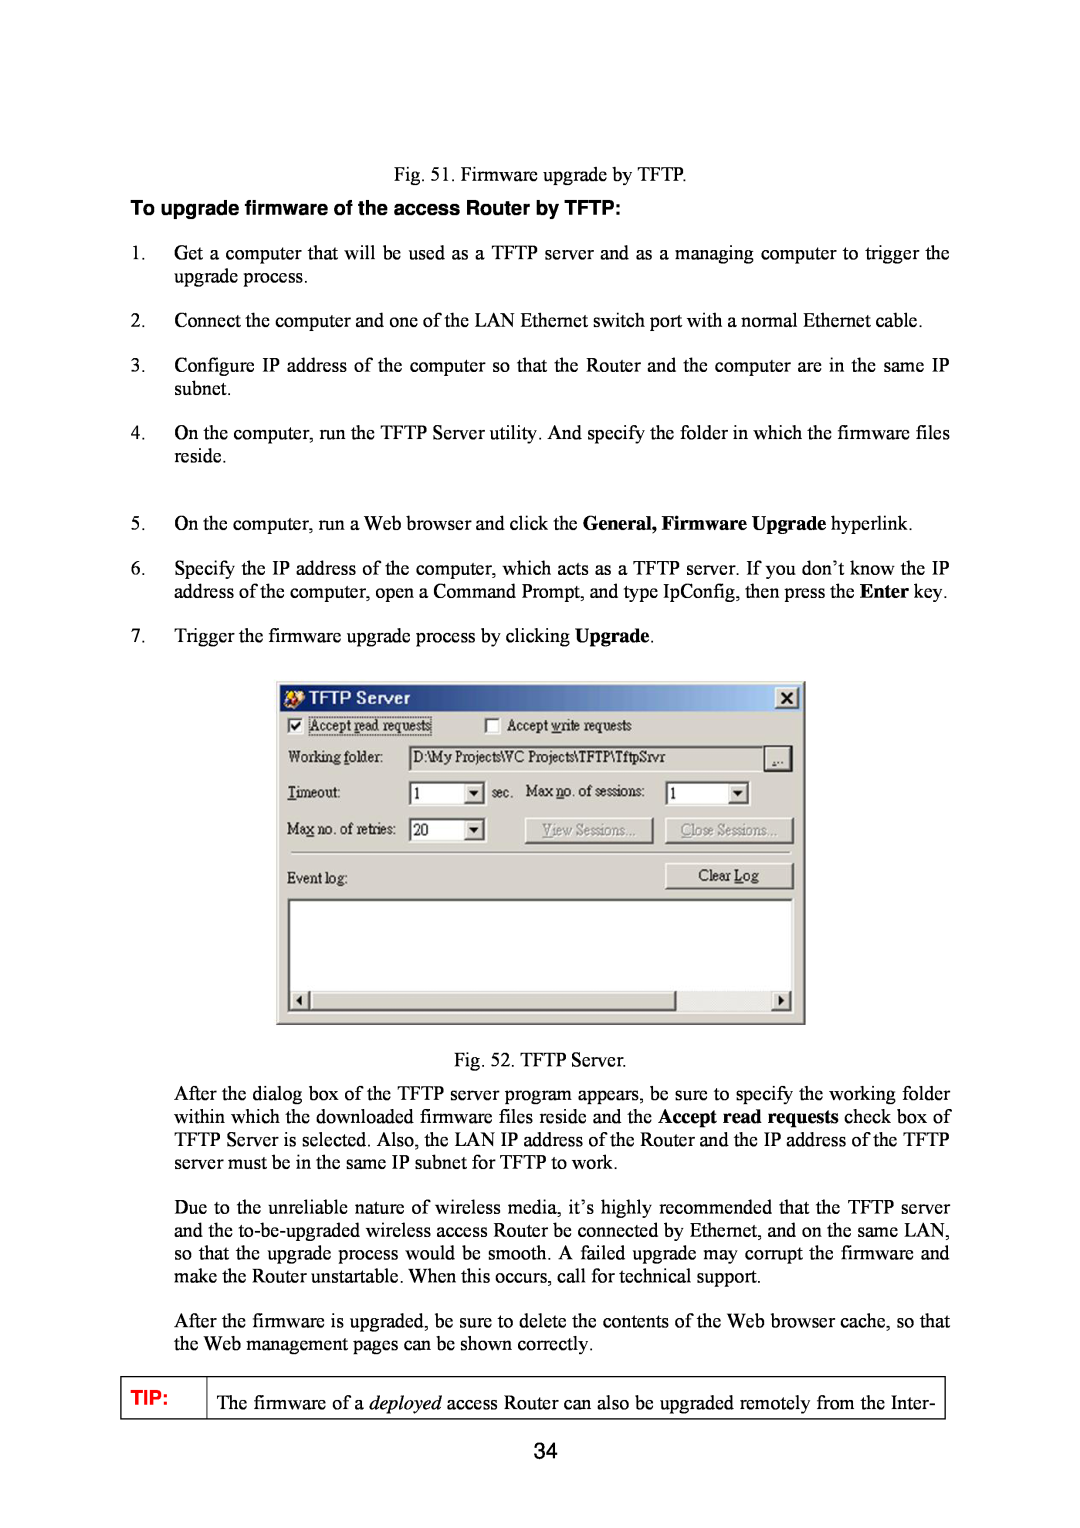 Epson IWE3200-H manual To upgrade firmware of the access Router by TFTP 